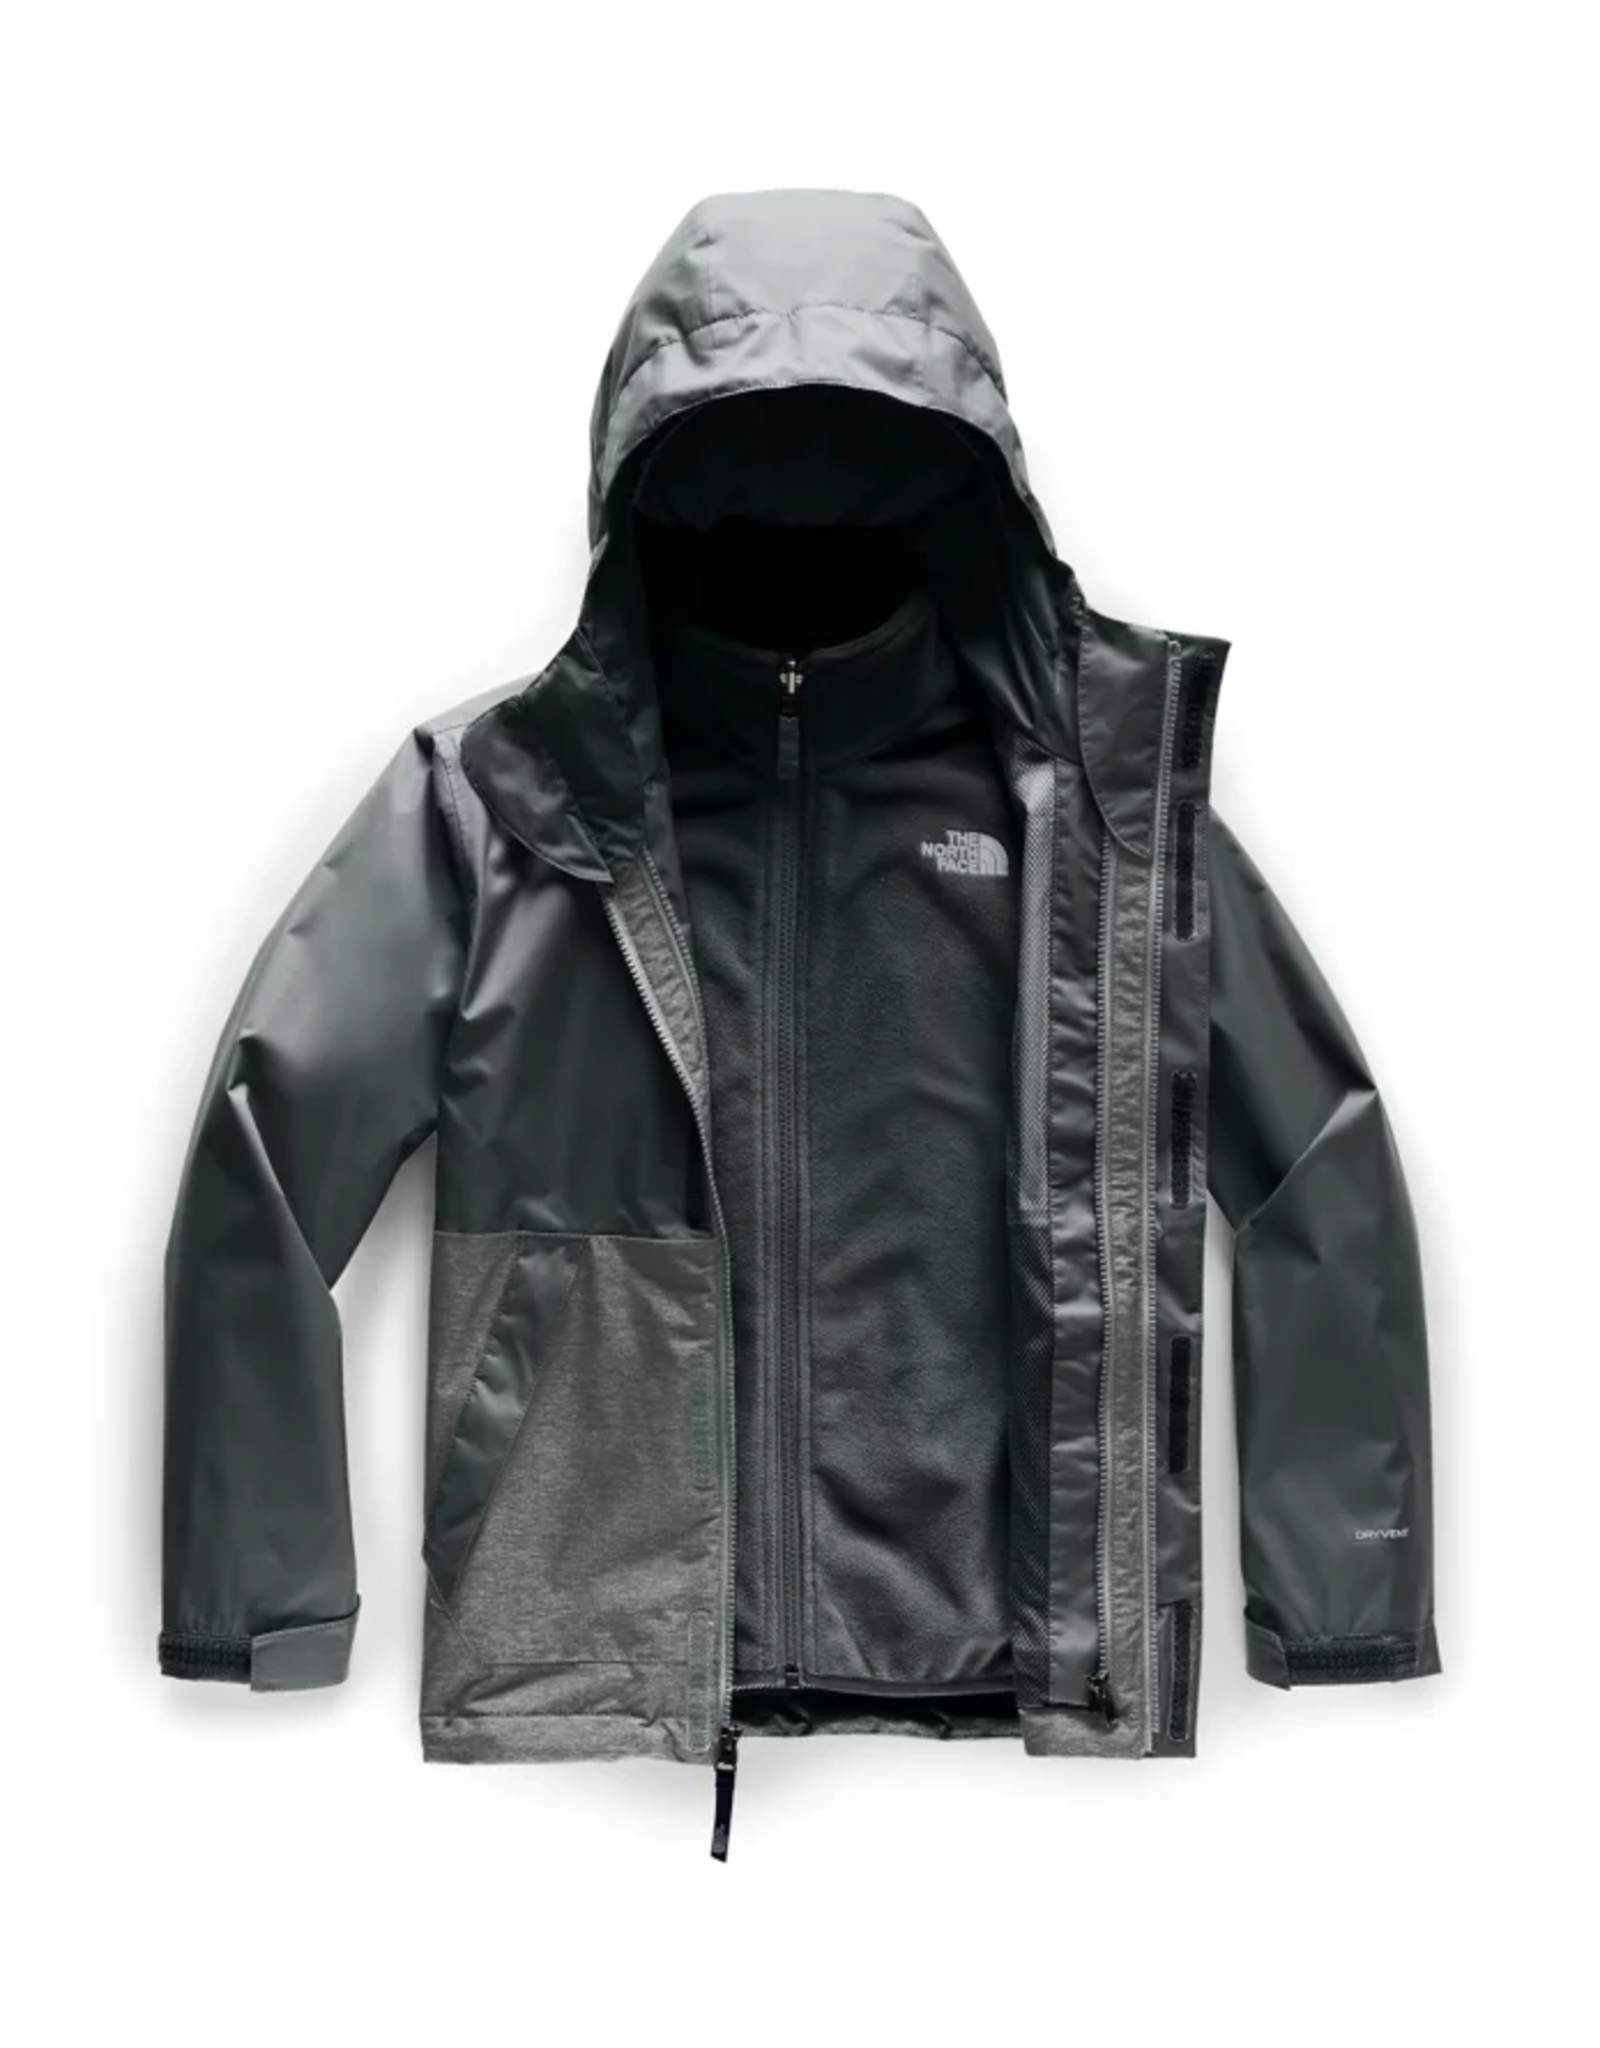 north face vortex triclimate jacket sale